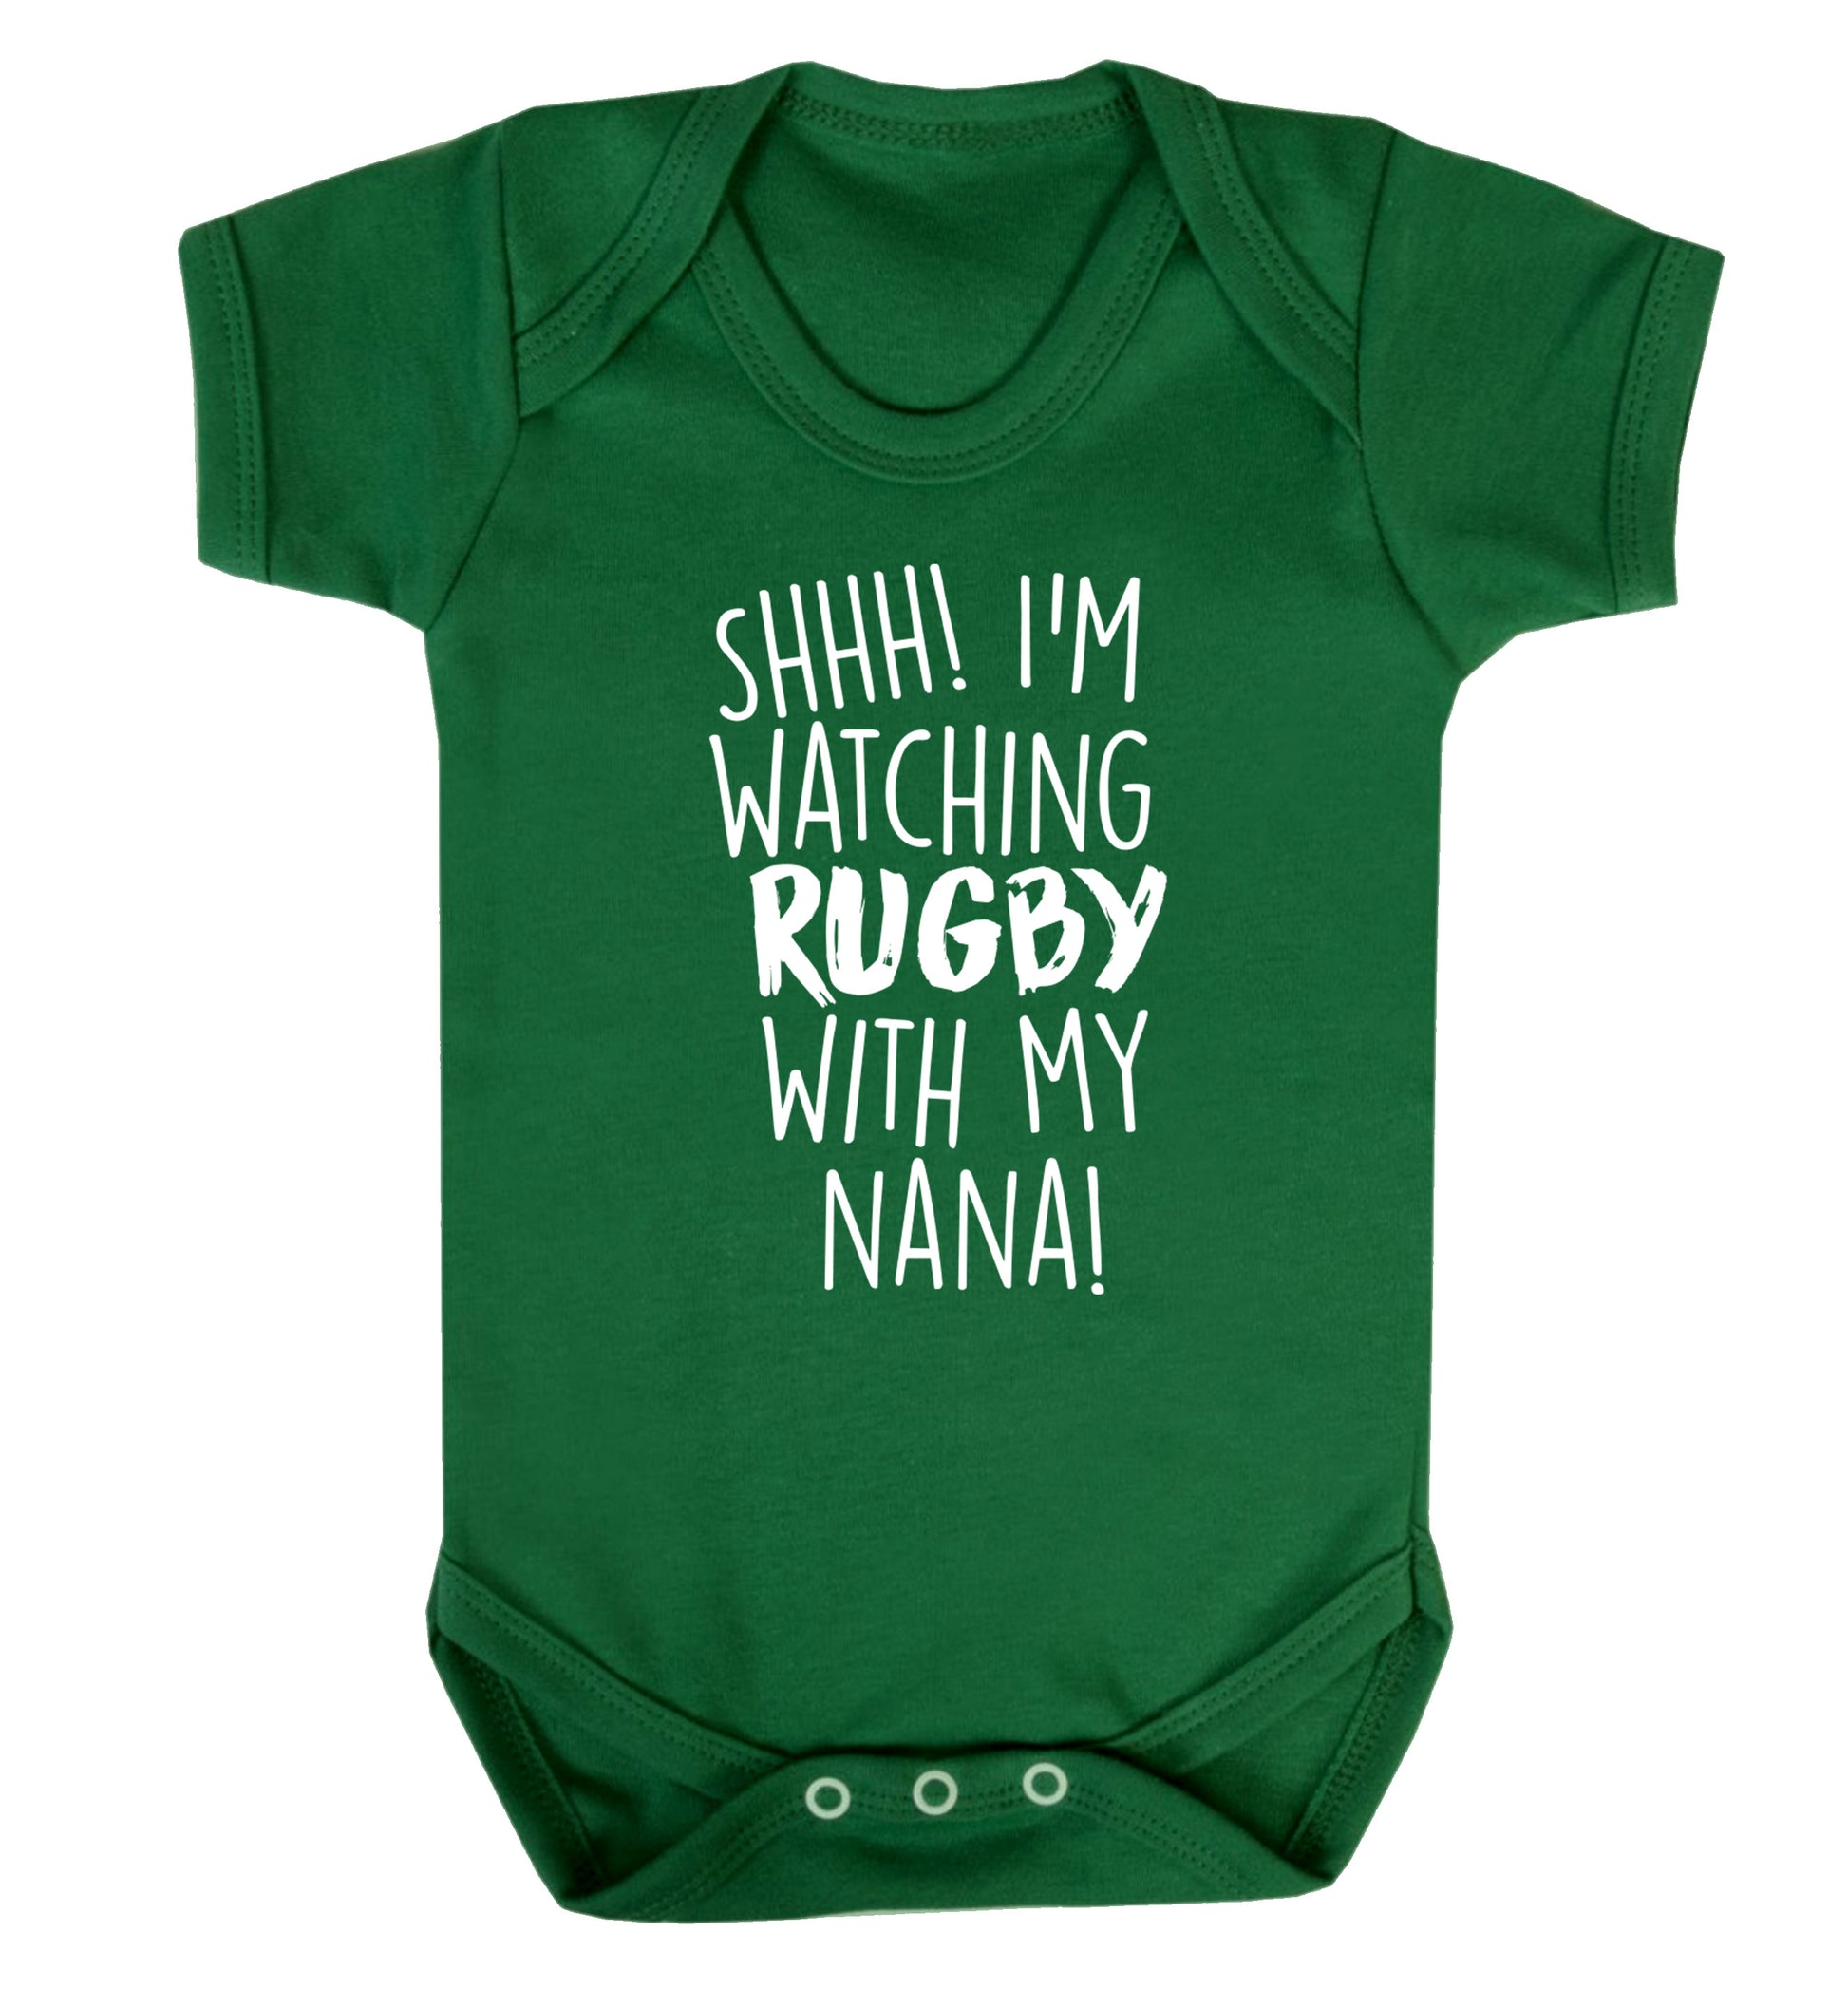 Shh I'm watching rugby with my nana Baby Vest green 18-24 months